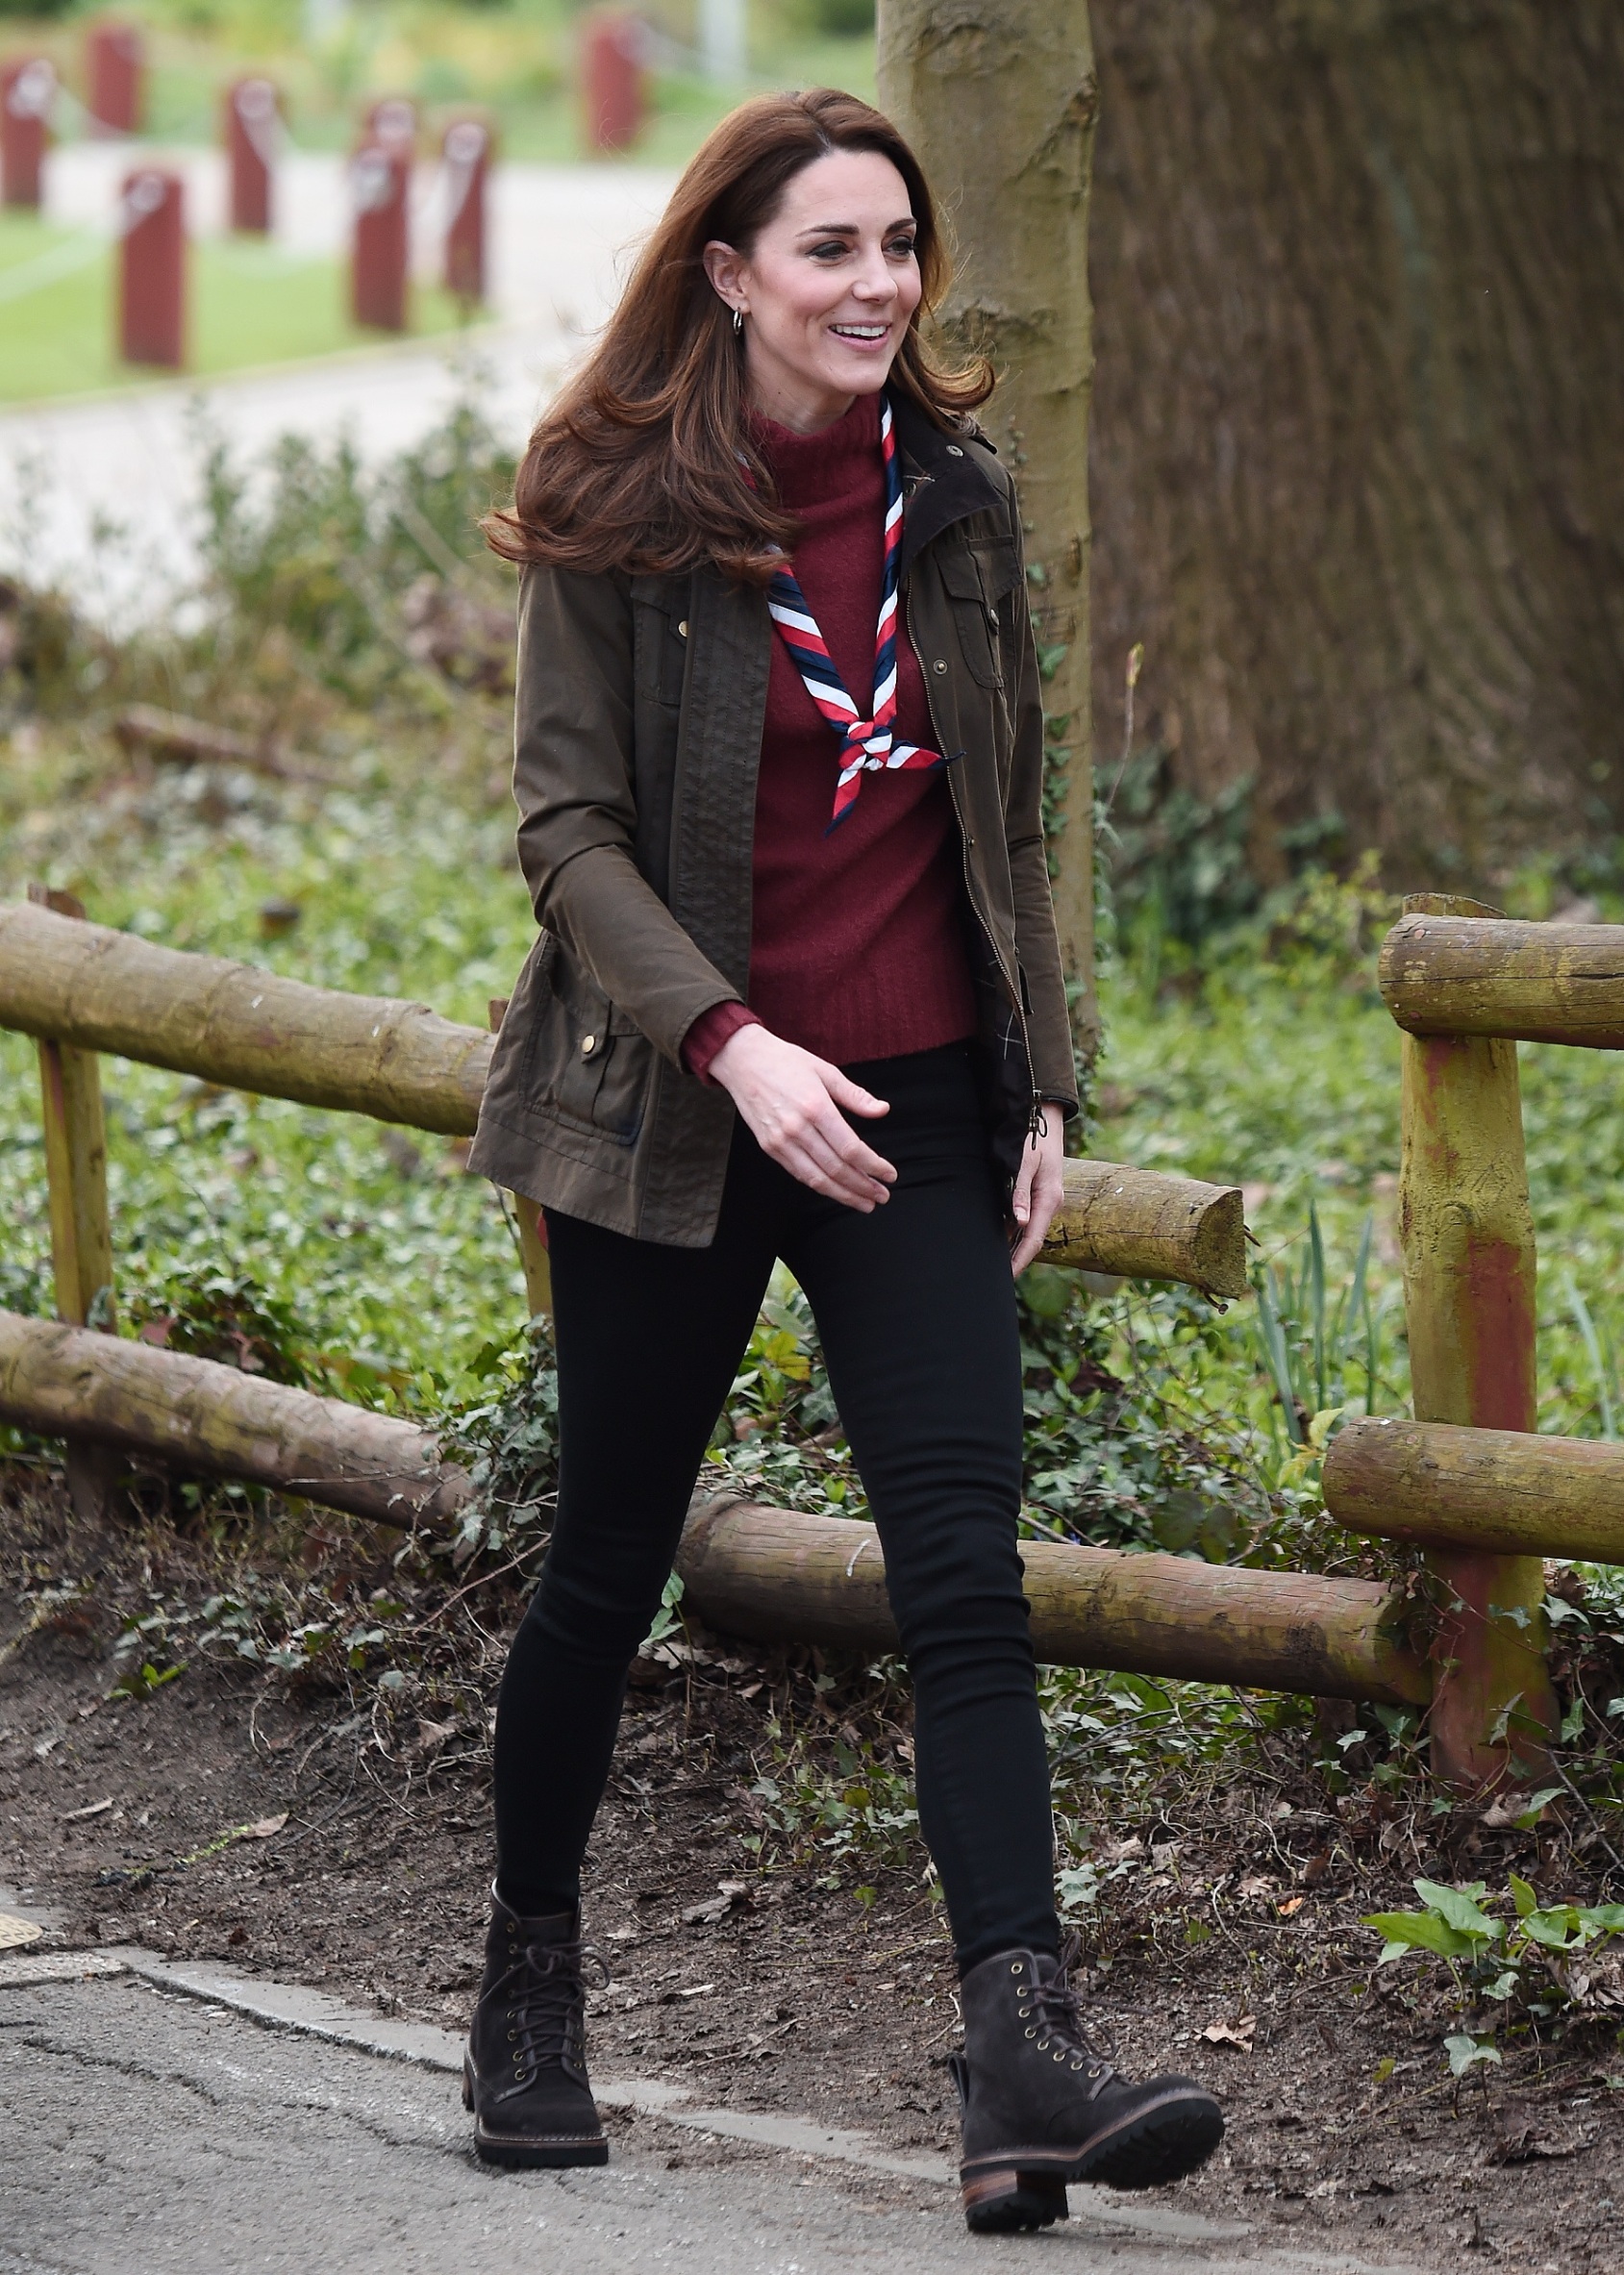 EPPING, ENGLAND - MARCH 28: Catherine, Duchess of Cambridge at the Scout's Early Years Pilot, Gilwell Park  on March 28, 2019 in Epping, England. (Photo by Eamonn M. McCormack/Getty Images)